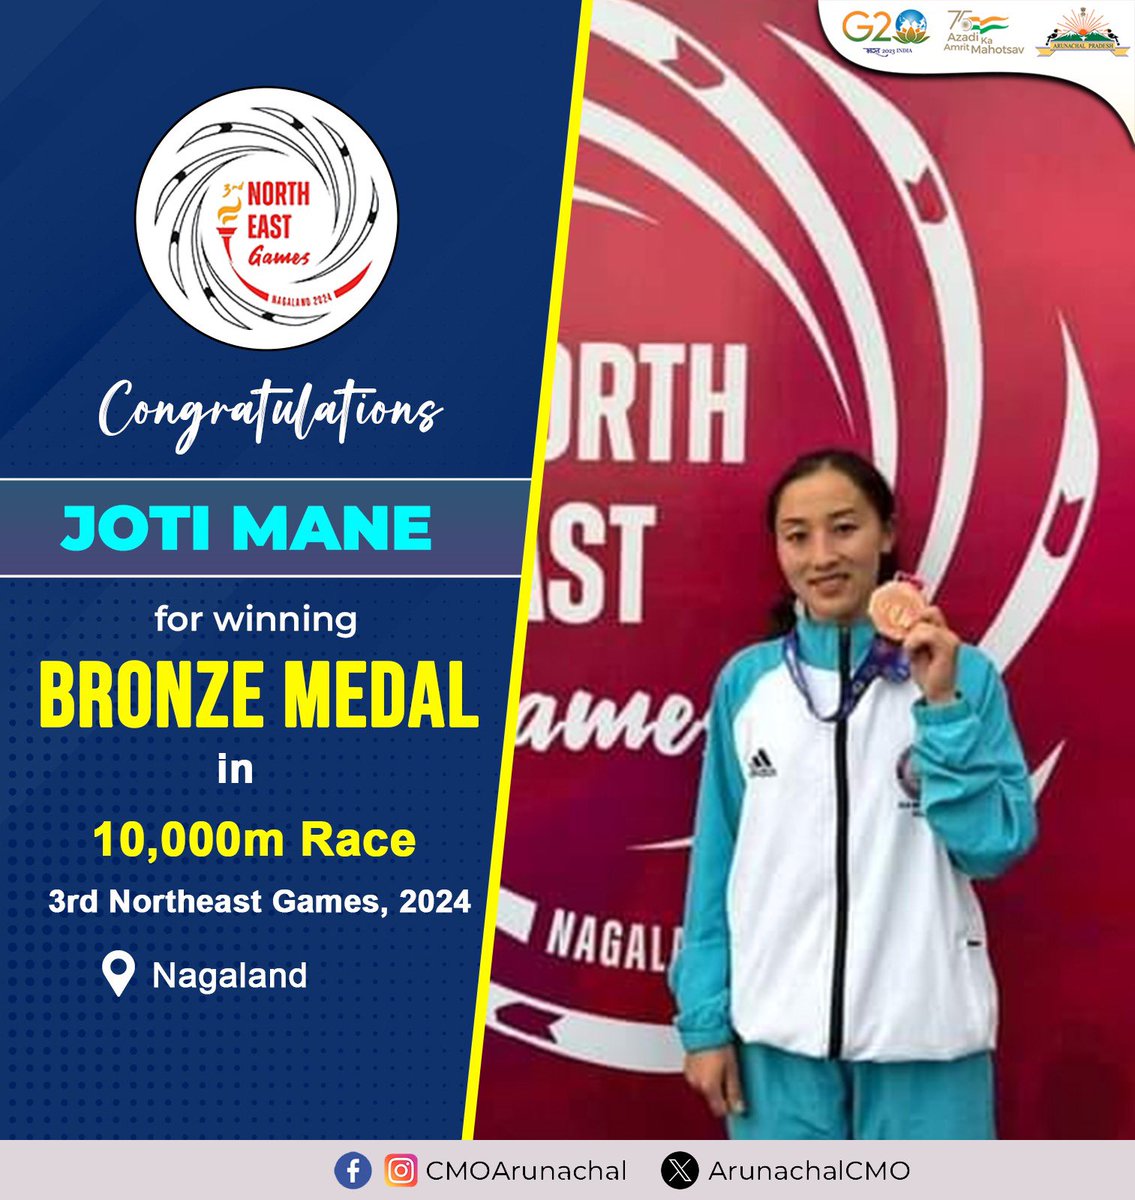 Congratulations to Joti Mane for clinching the Bronze Medal in the 10,000m race at the NorthEast Games, with an impressive time of 39:52.94! 🥉 Your dedication and perseverance inspire us all. Here's to many more victories on the track! #JotiMane #BronzeMedal #Athletics